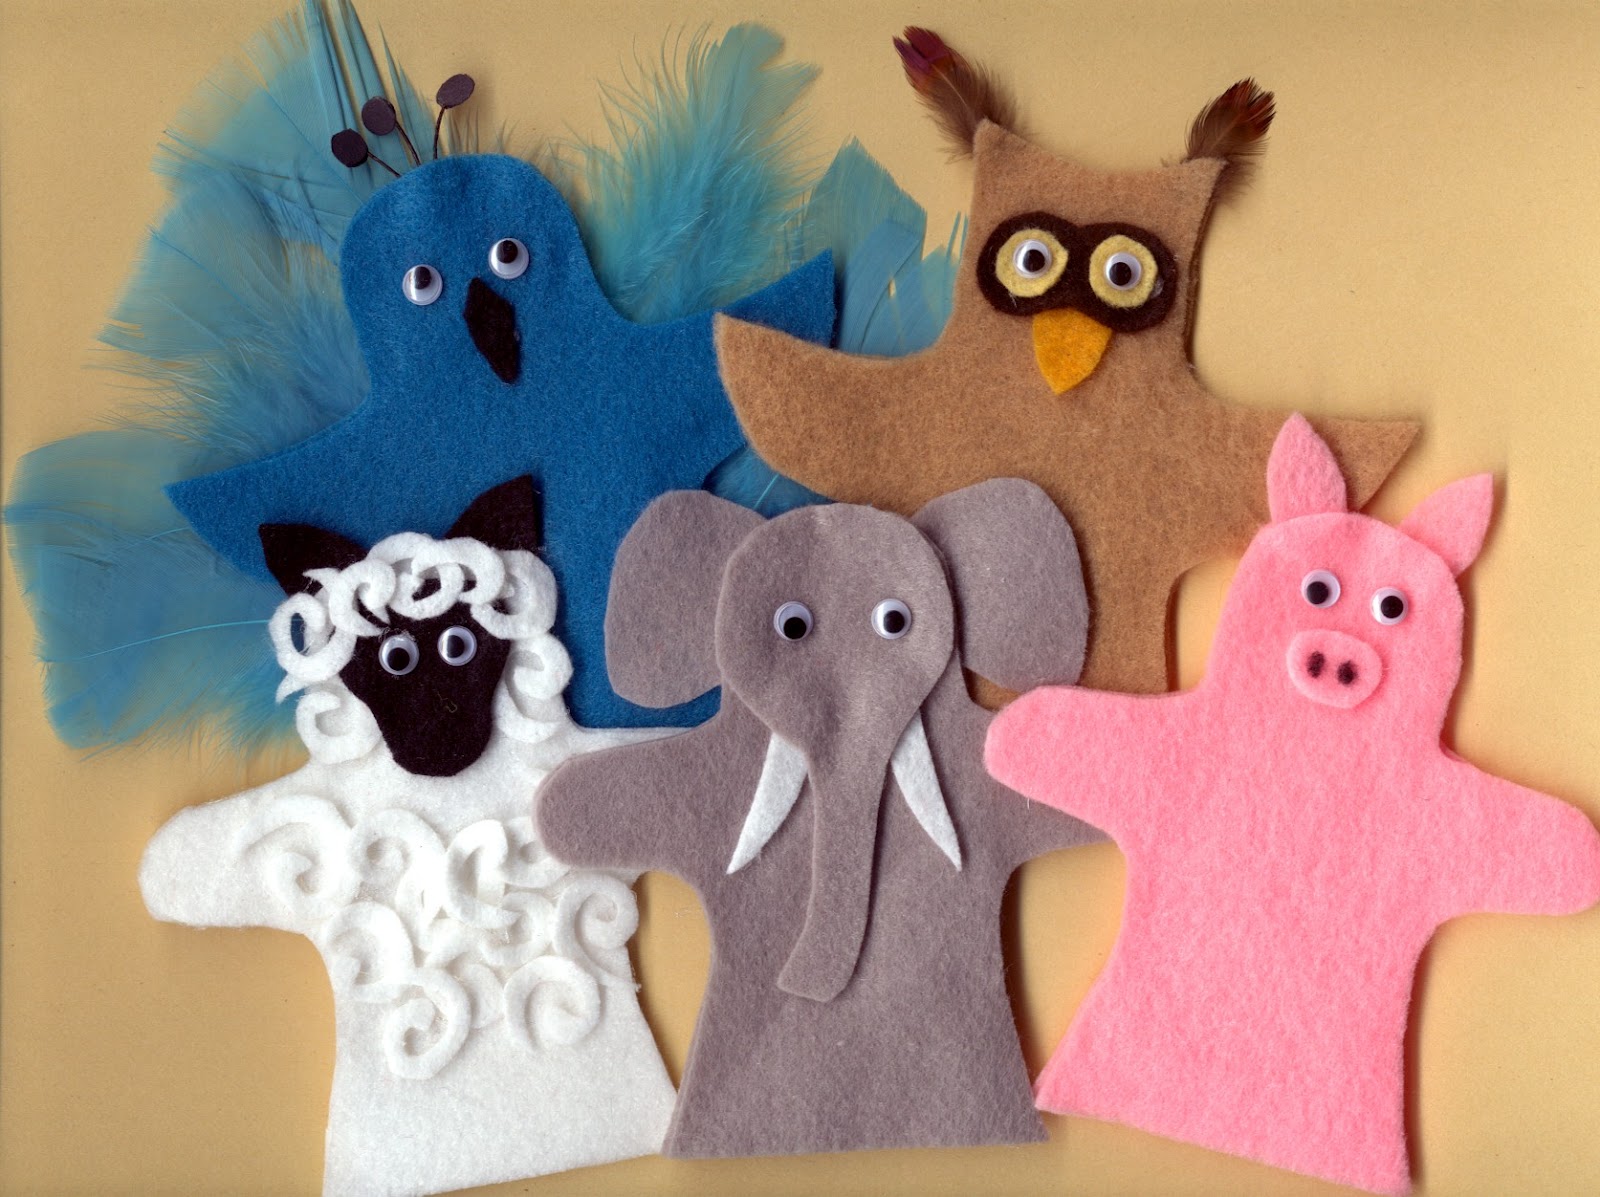 Finger Puppets Baby Development: How Finger Puppets Can Help Your Baby’s Development